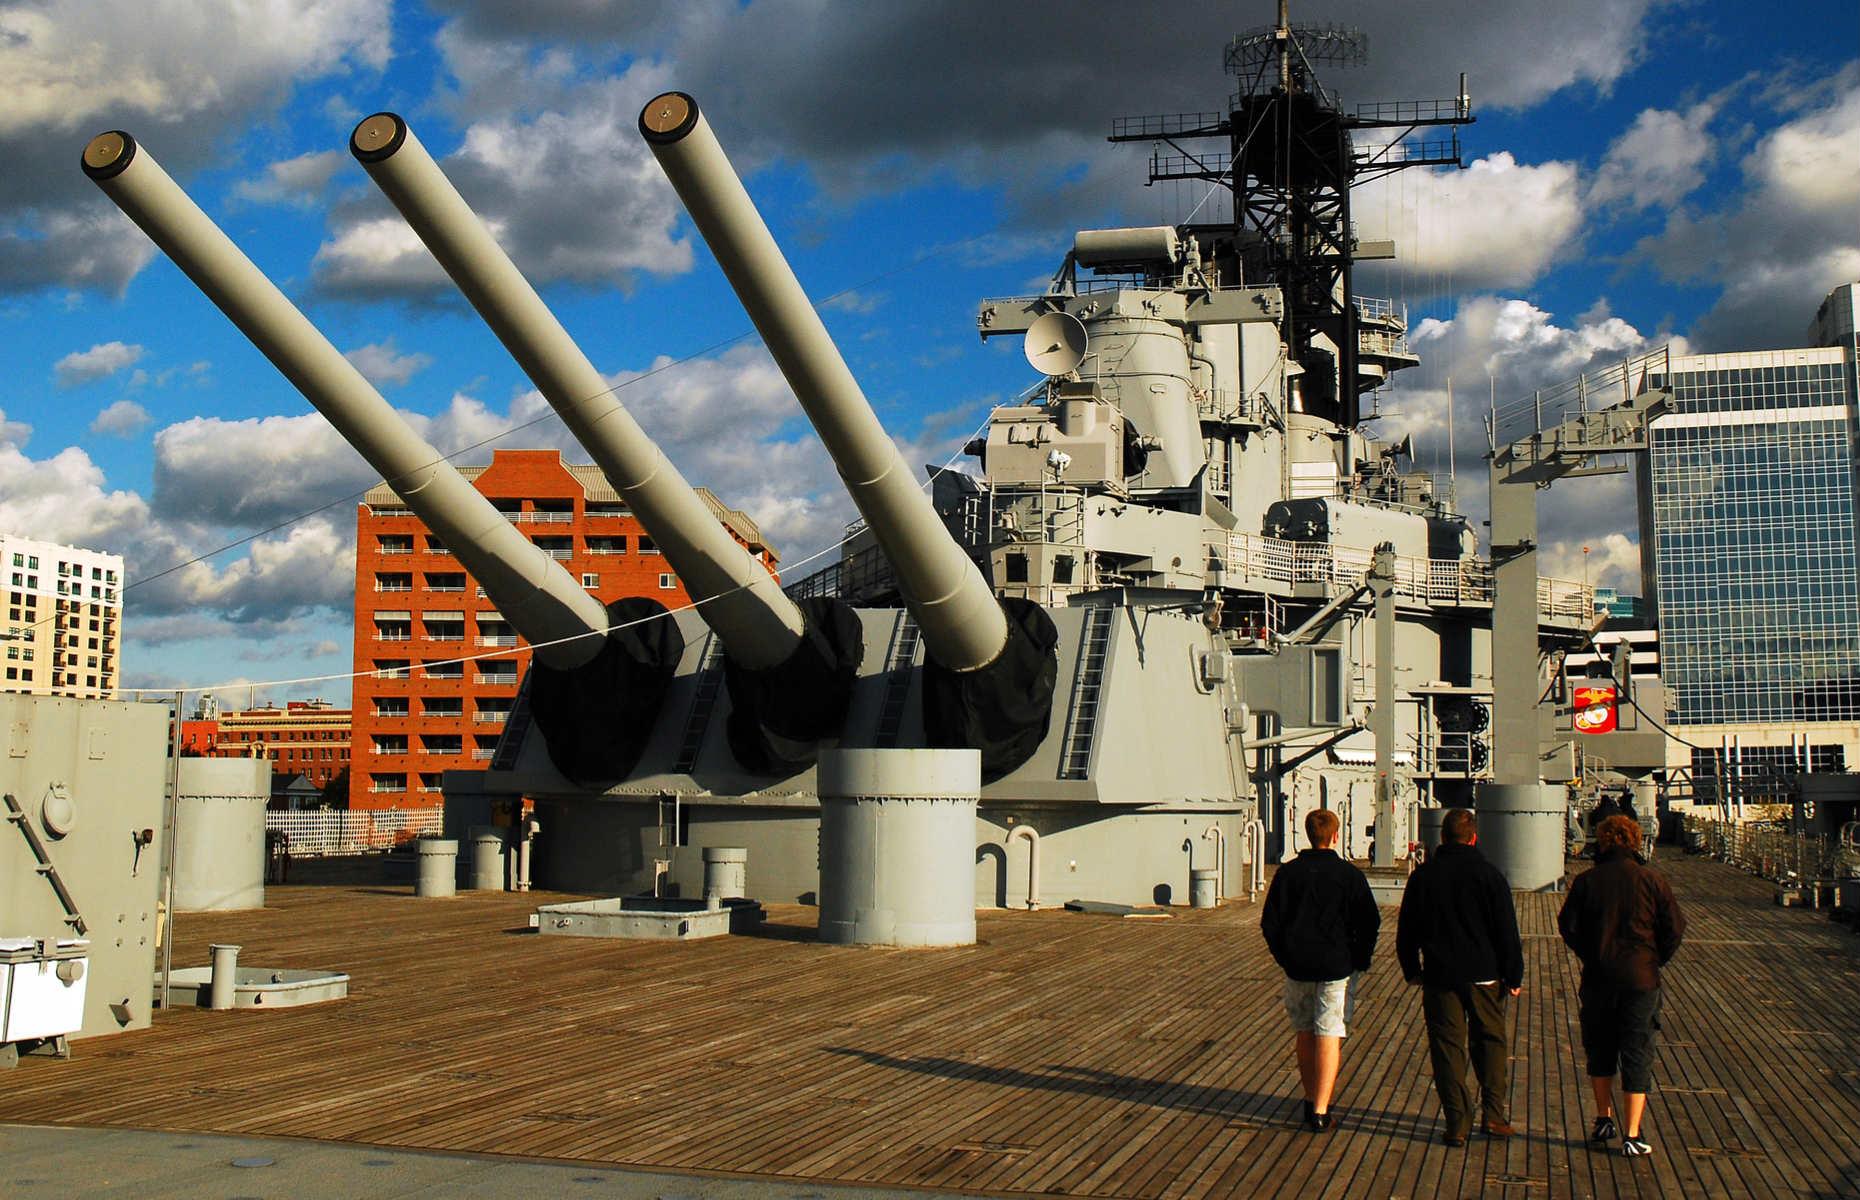 <p>A visit to the USS Wisconsin is fascinating. You can buy a <a href="https://nauticus.org/tickets/">general admission ticket</a> to explore the outdoor deck and main interior spaces, like the galley and ship's library, or book a more indepth guided tour led by enlisted volunteers or retired officers. <a href="https://nauticus.org/battleship-wisconsin-overnights/">Overnight stays</a> are possible too, giving you time to explore Virginia’s second-largest city, which is something of a hidden highlight with the fantastic Chrysler Museum of Art and the lovely riverside Virginia Zoo.</p>  <p><a href="https://www.loveexploring.com/galleries/164573/fascinating-facts-about-the-worlds-most-luxurious-cruises?page=1"><strong>Now discover fascinating facts about luxury cruises</strong></a></p>